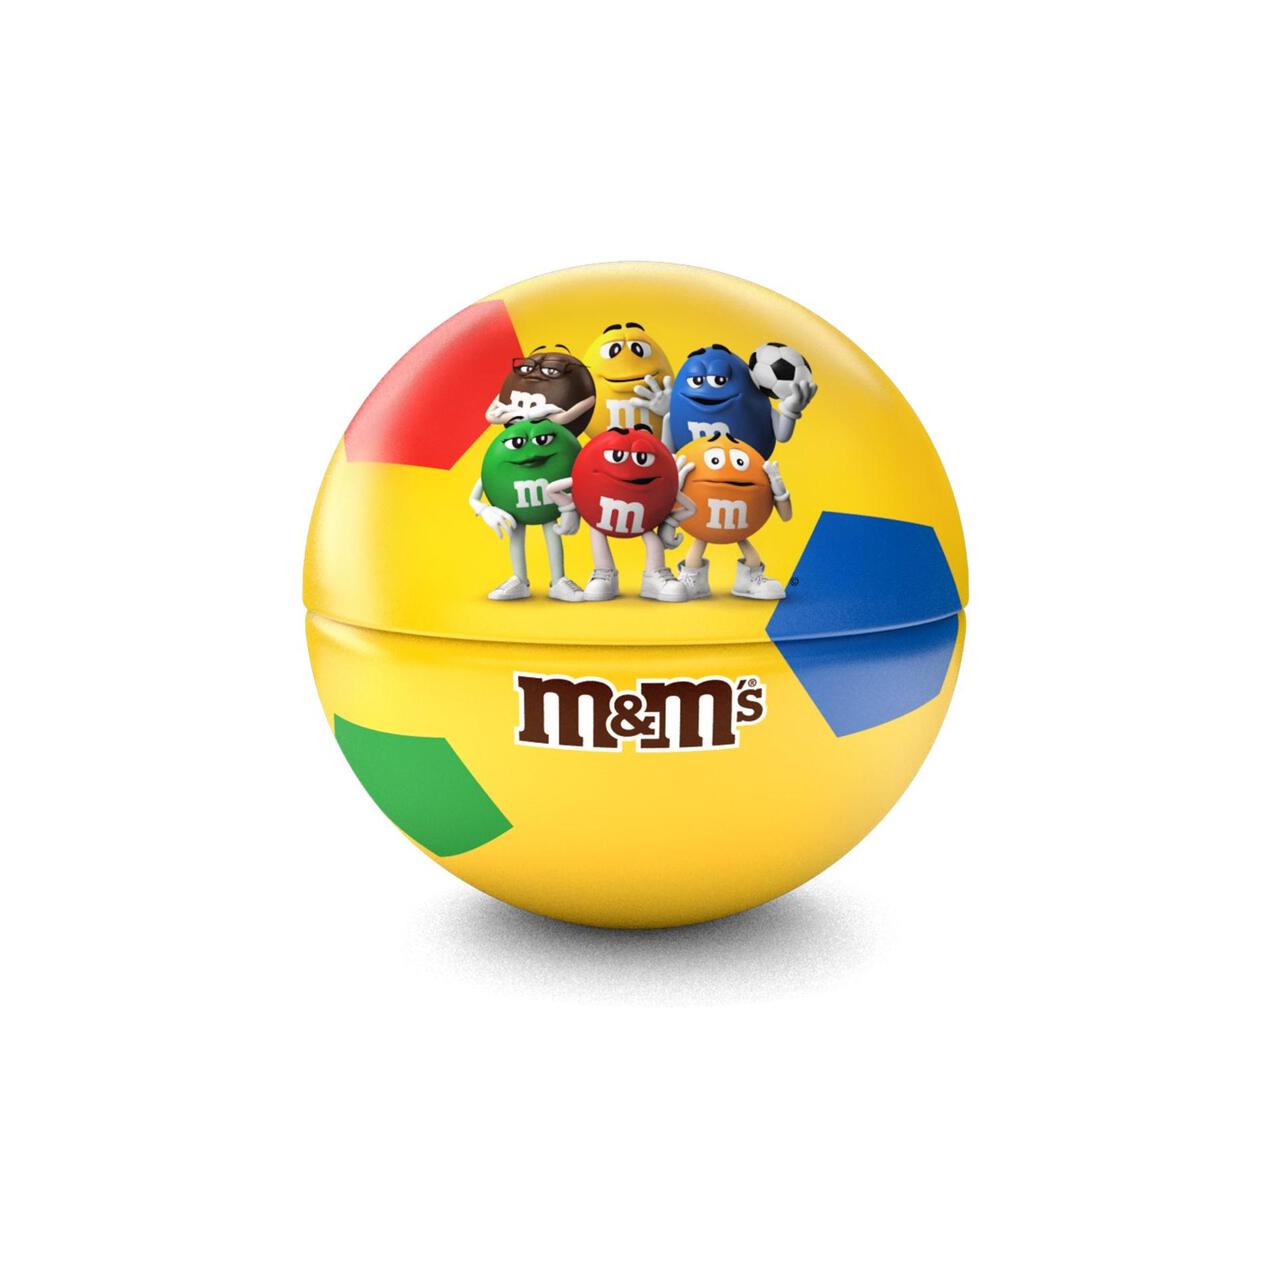 M&M Promotional Bowl Ball 0.75g